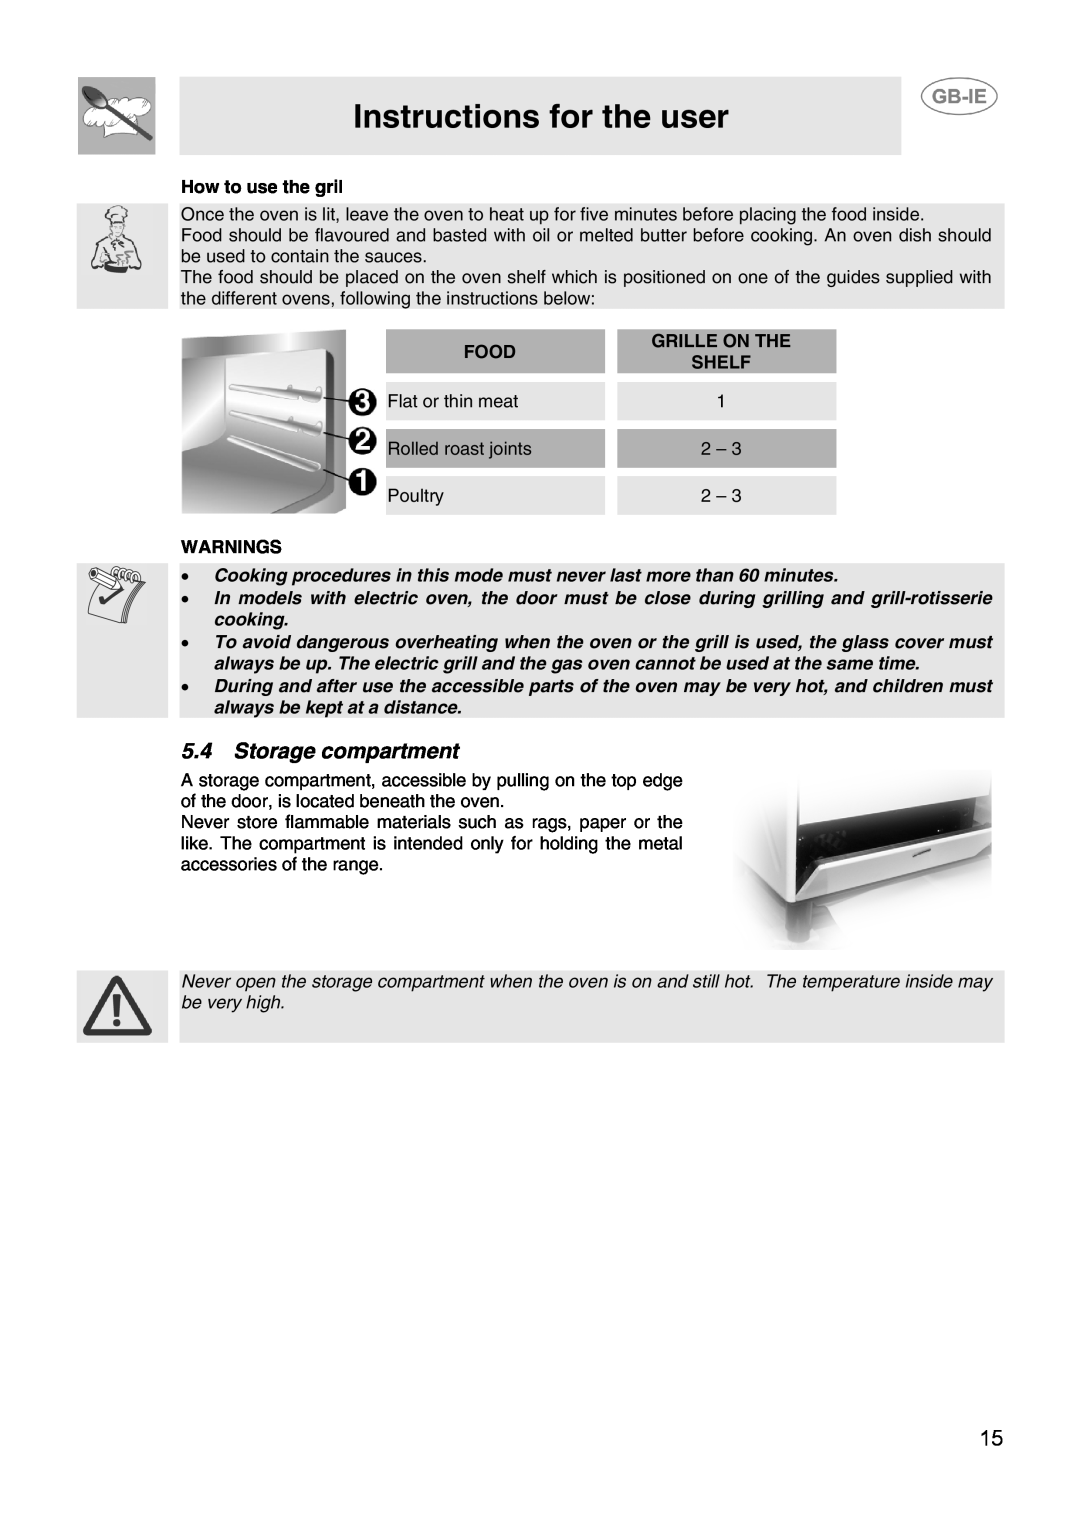 Smeg CIX64MS-5 Storage compartment, Instructions for the user, How to use the gril, Food, Grille On The, Shelf, Warnings 